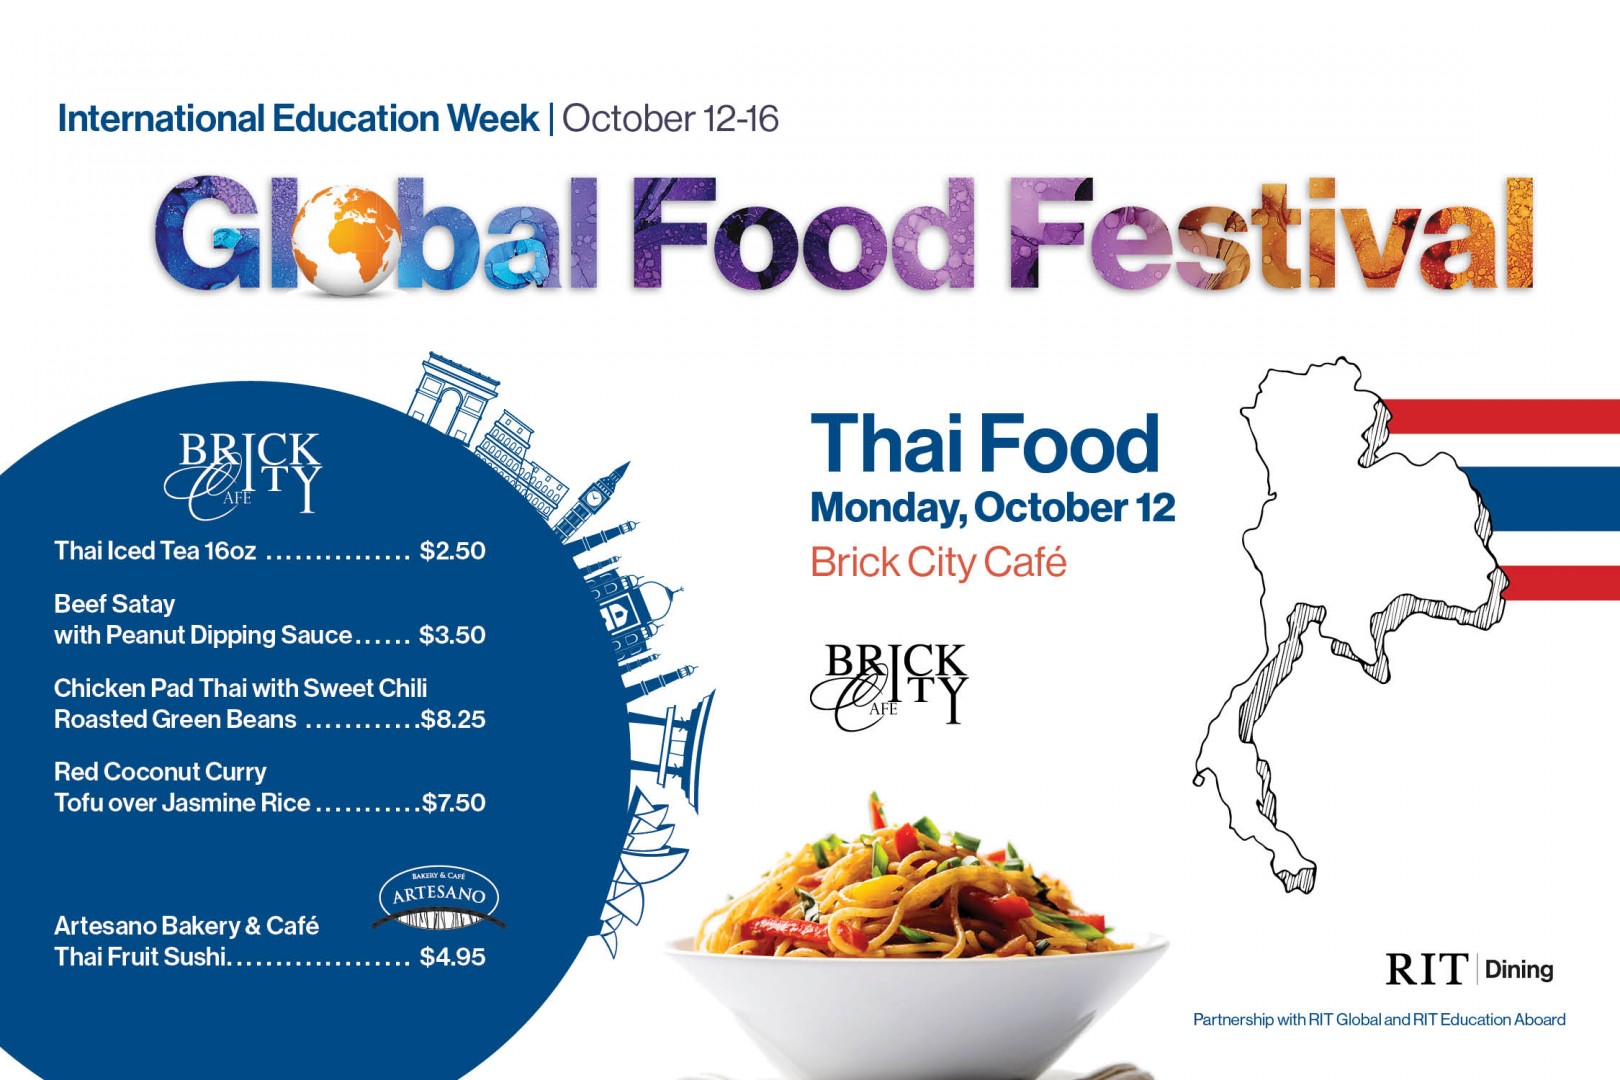 Graphic with text "Global Food Festival", "Thai Food", and outline of country